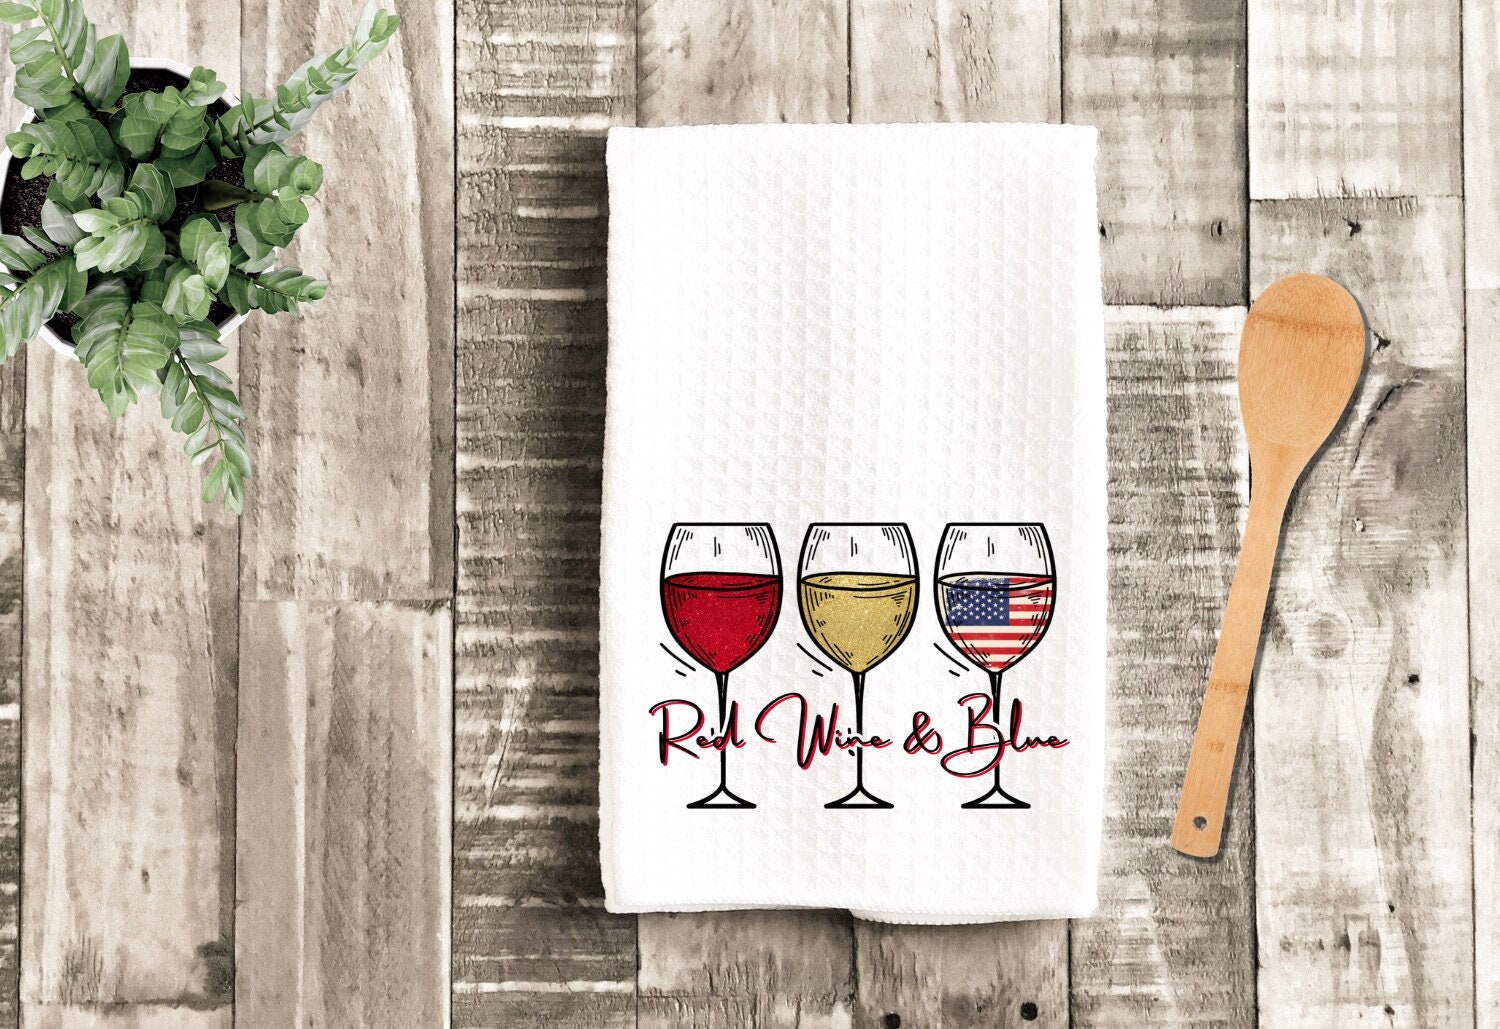 Ivory or White Beer & Wine Dish Towels Bar Home Gift Bartender 